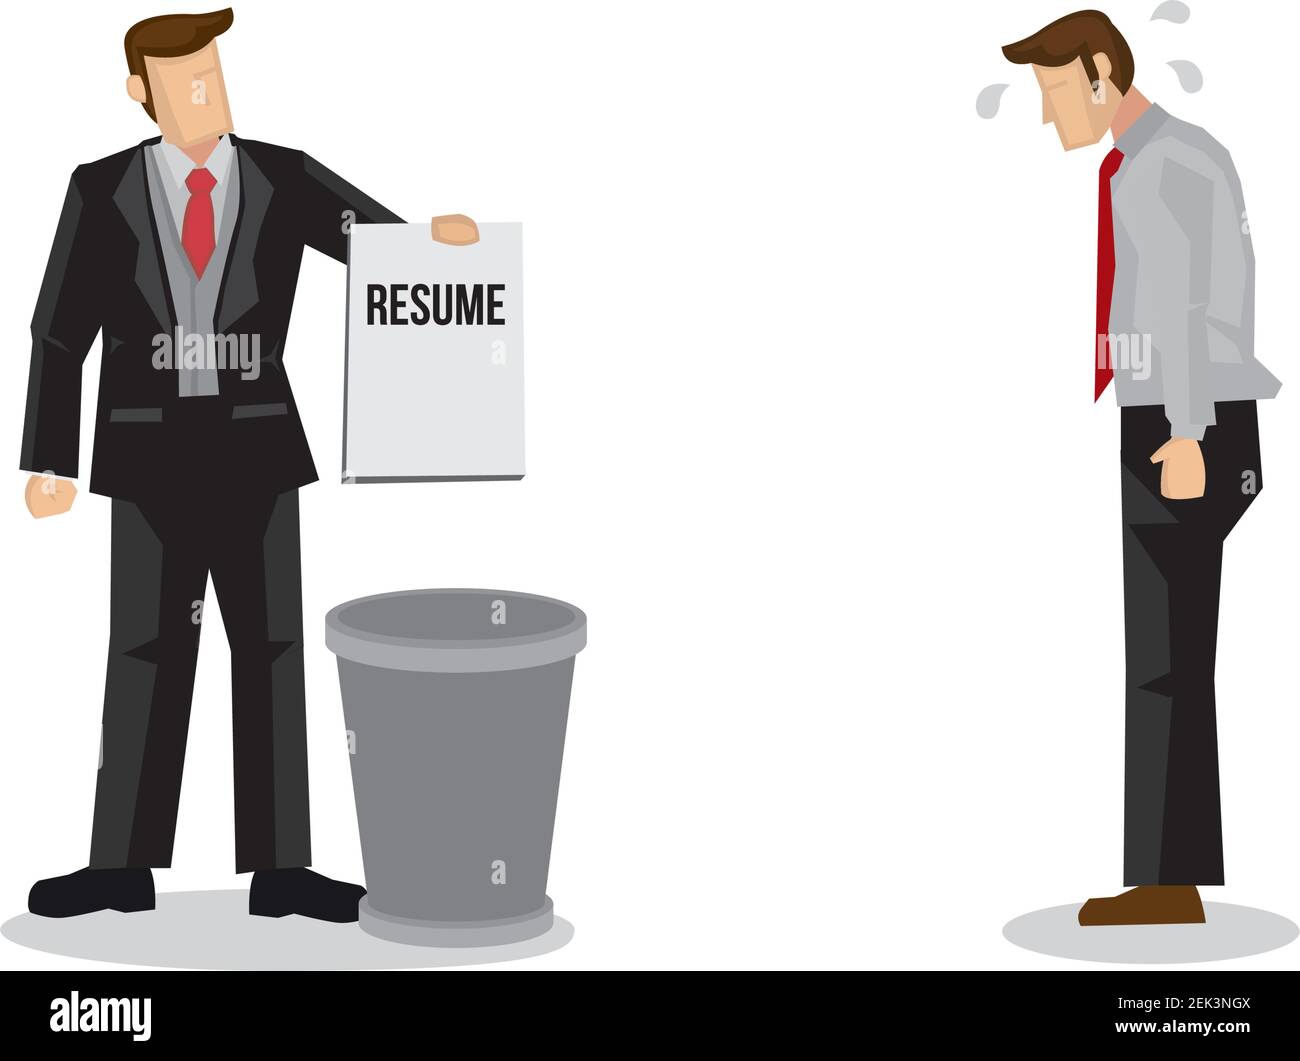 Recruiter throwing away the resume of a job applicants. Concept of rejection, depression and the poor job market. Vector illustration. Stock Vector